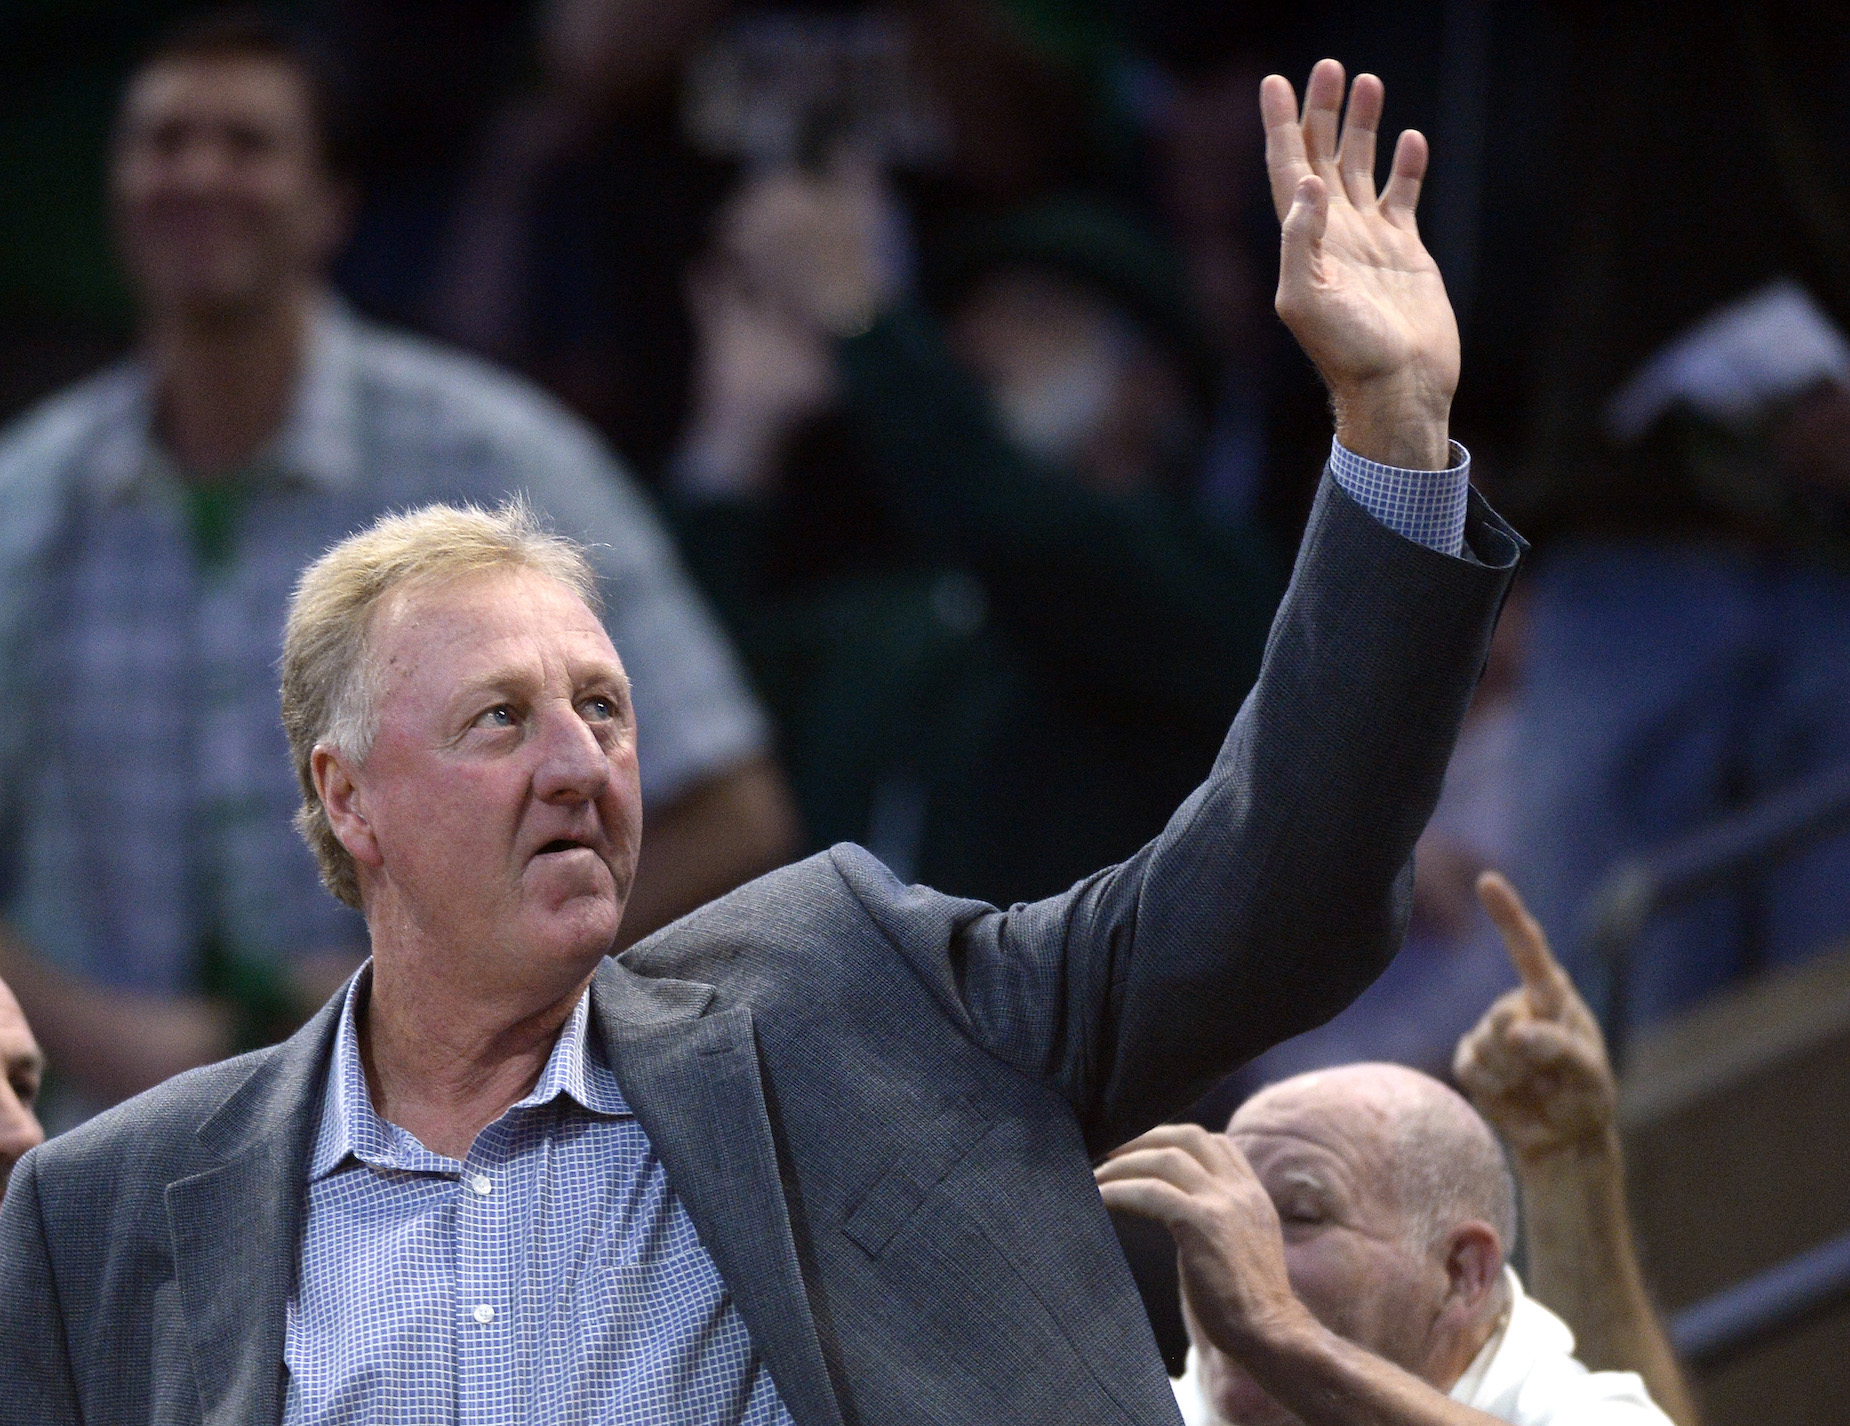 Boston Celtics legend Larry Bird was actually a pretty nice guy according to his peers.